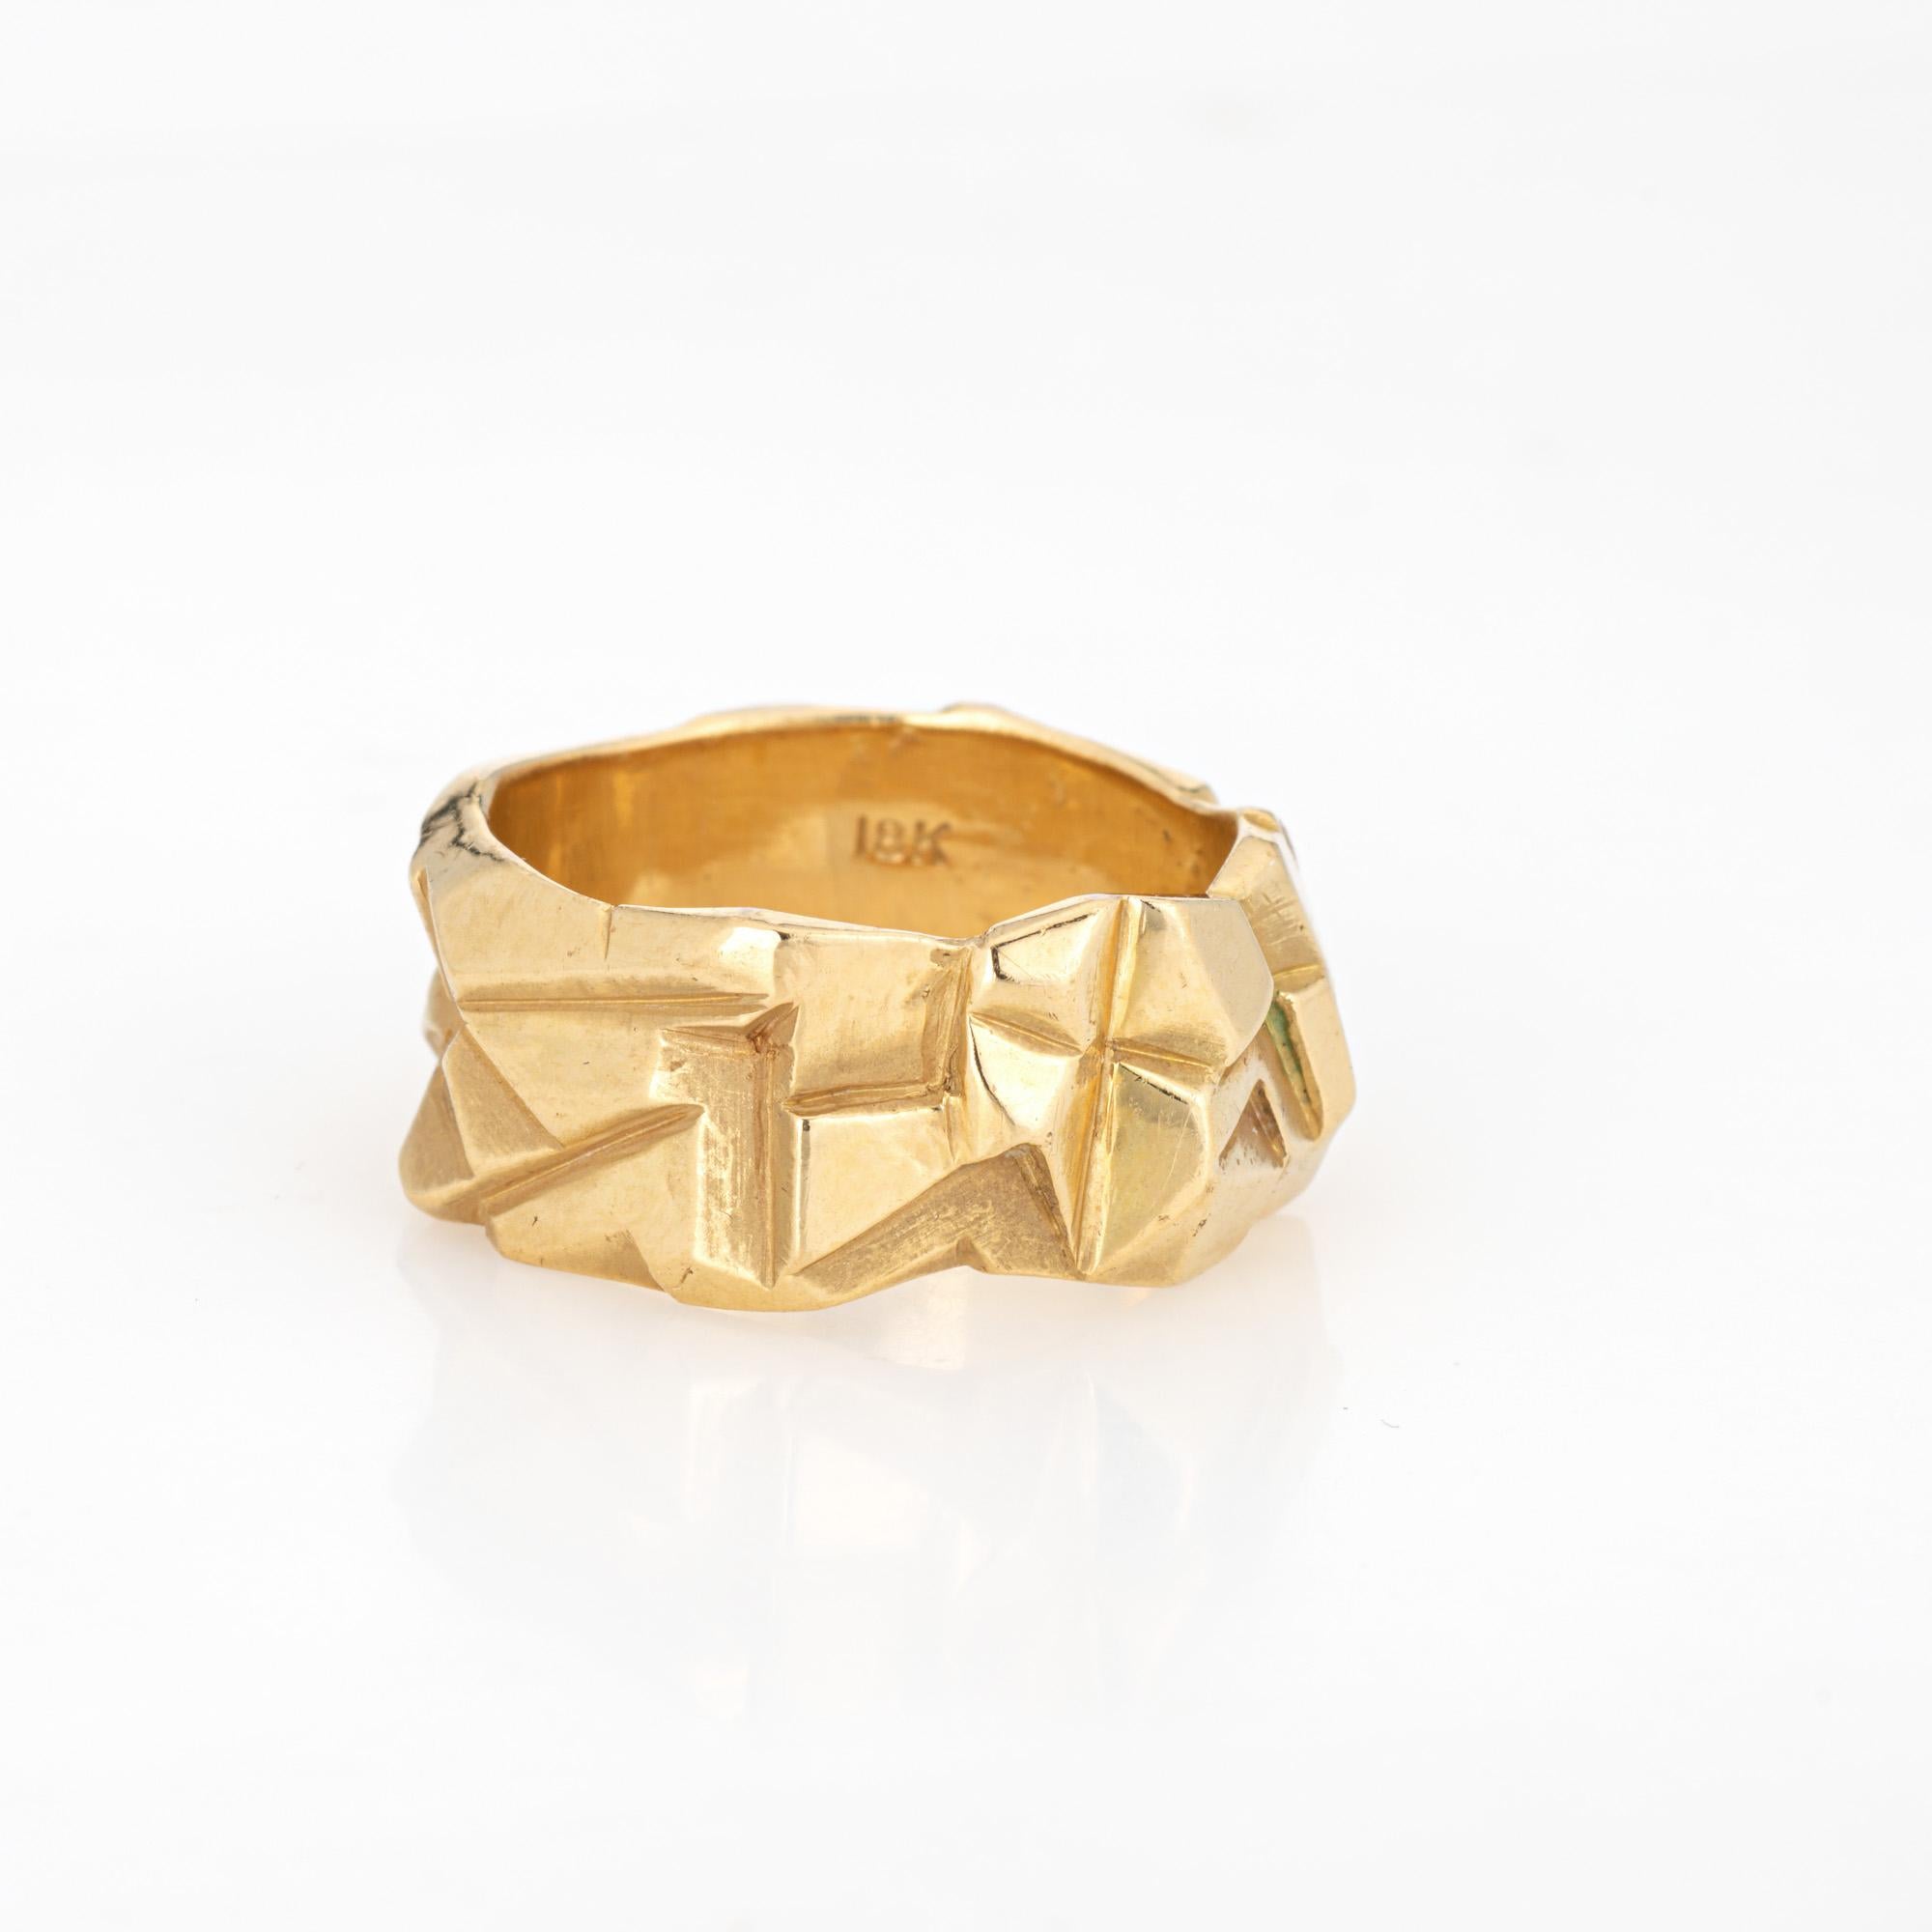 Modern Arthur King Geometric Ring Vintage 70s Band 18k Yellow Gold Sz 6.5 Fine Jewelry For Sale